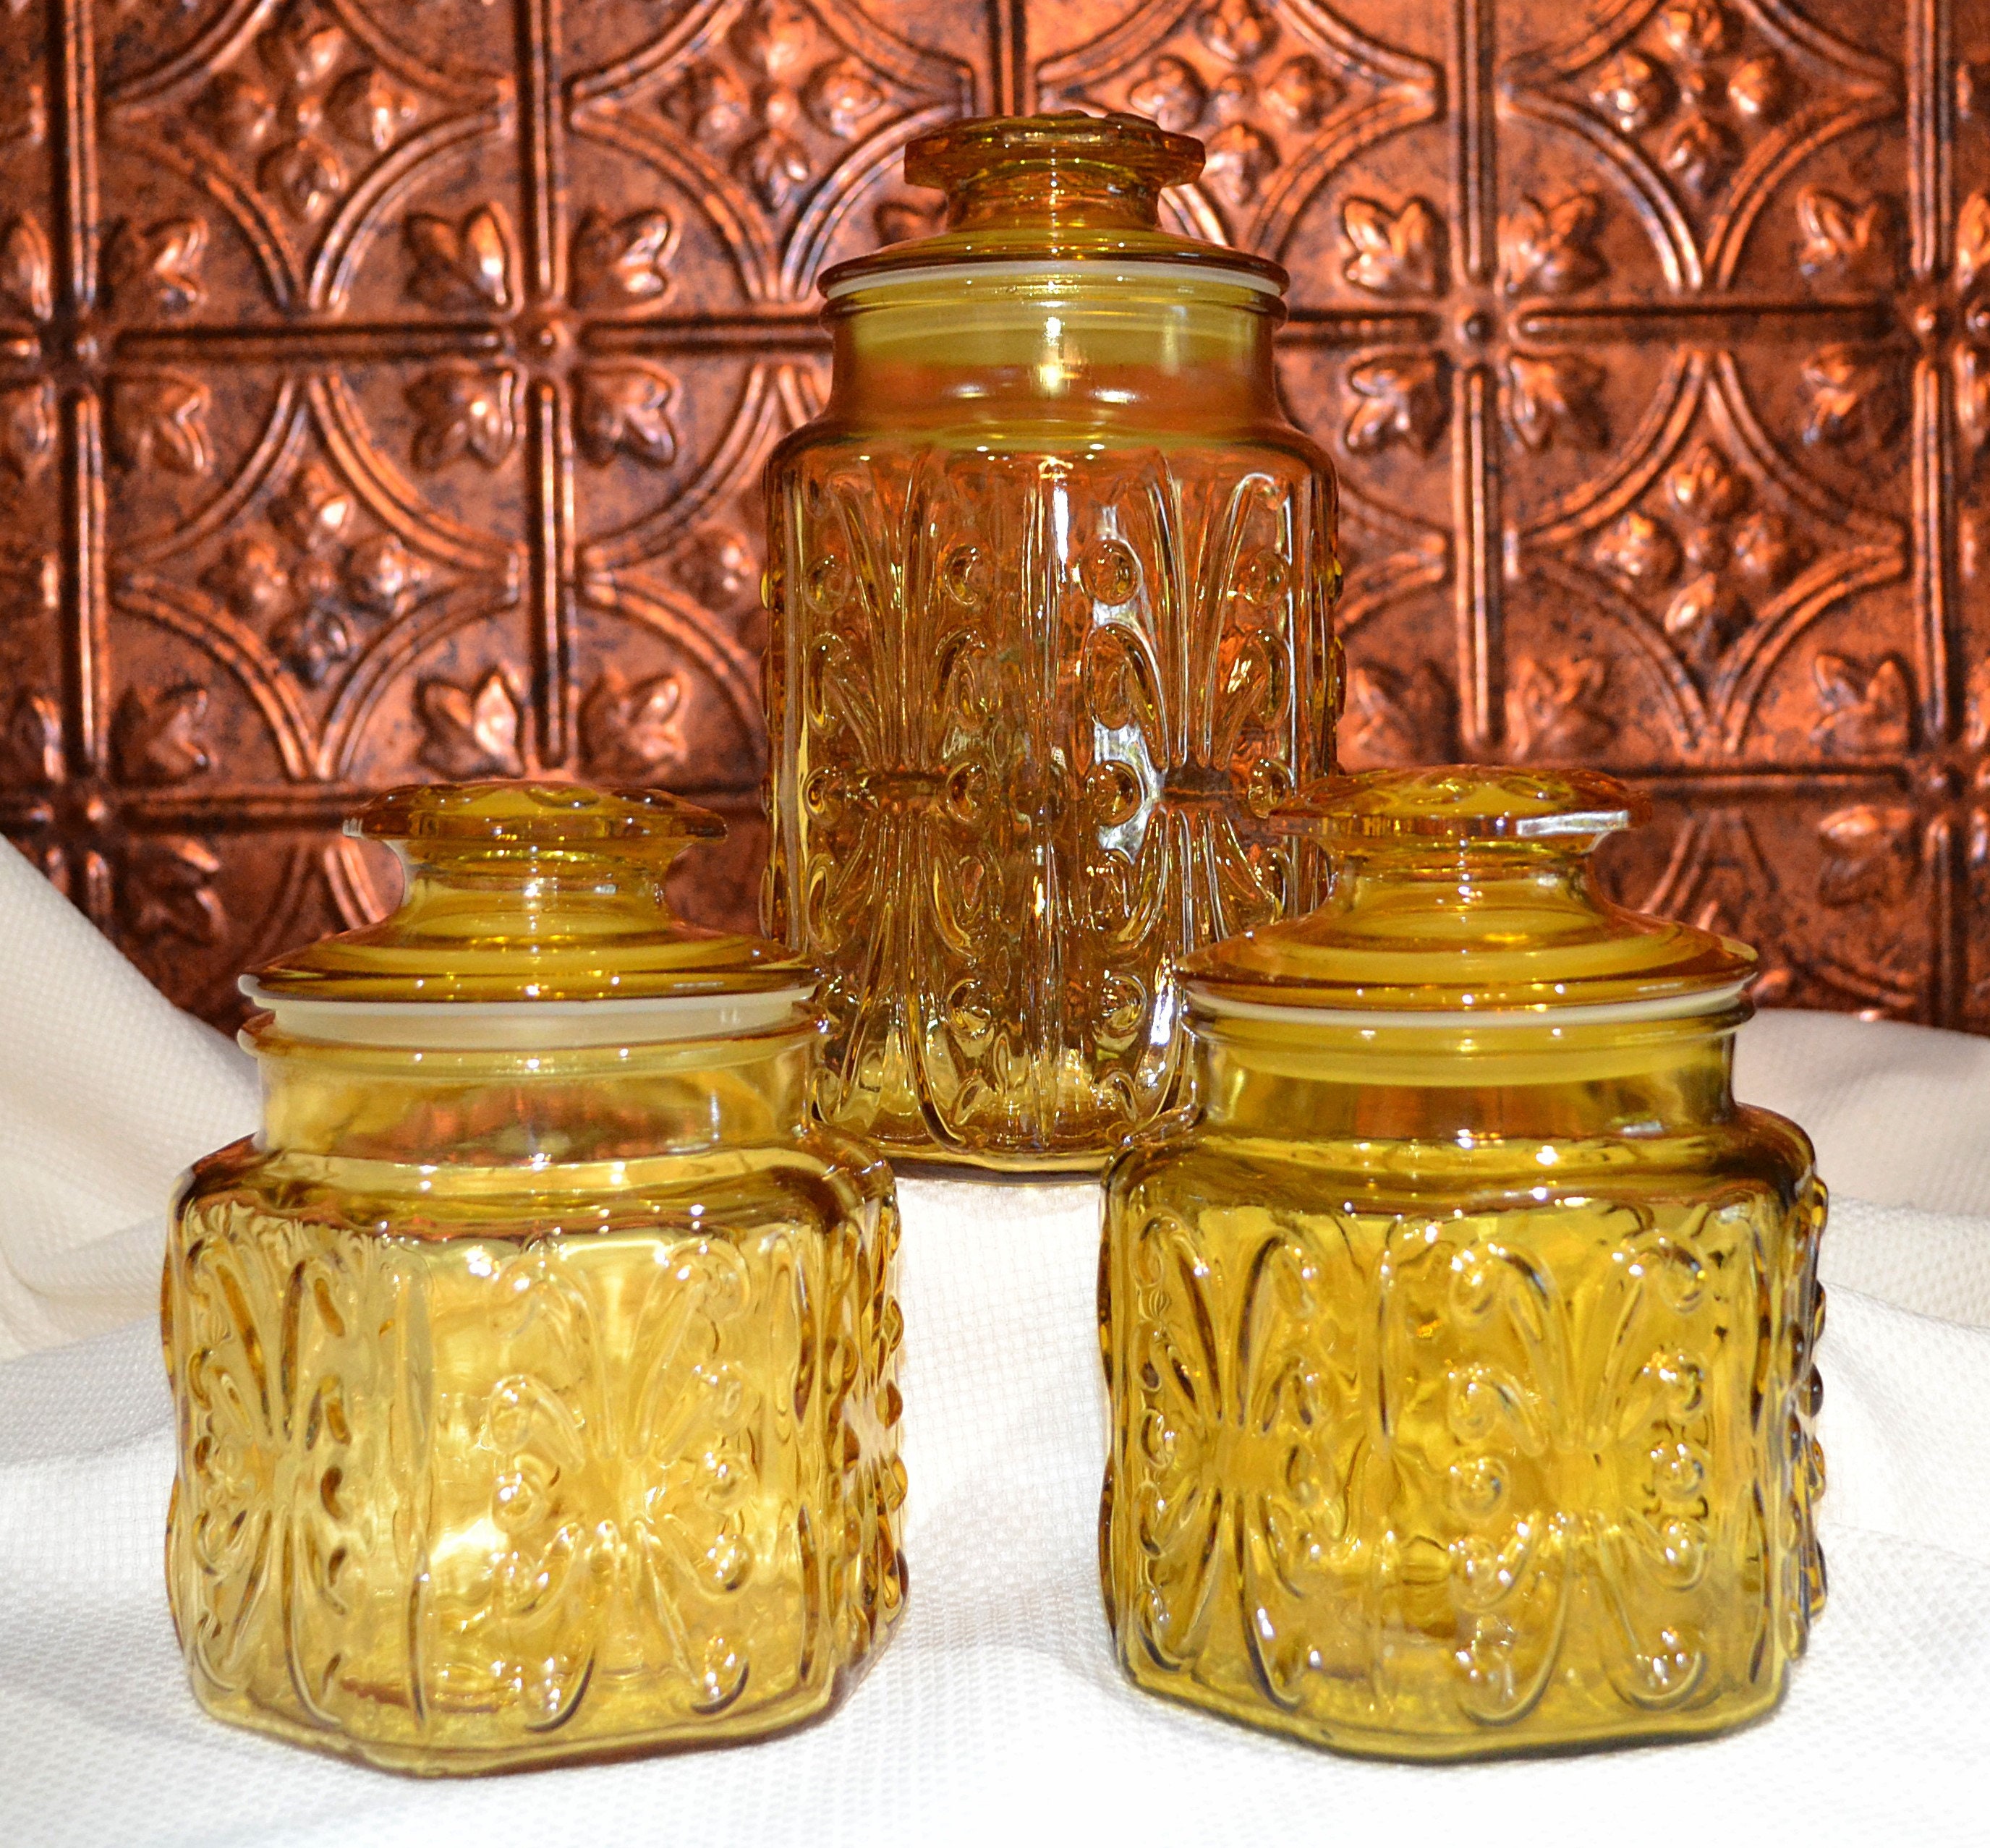 Glass Jar with Lid - Glass Canister 48oz - 2pc Canister Set for